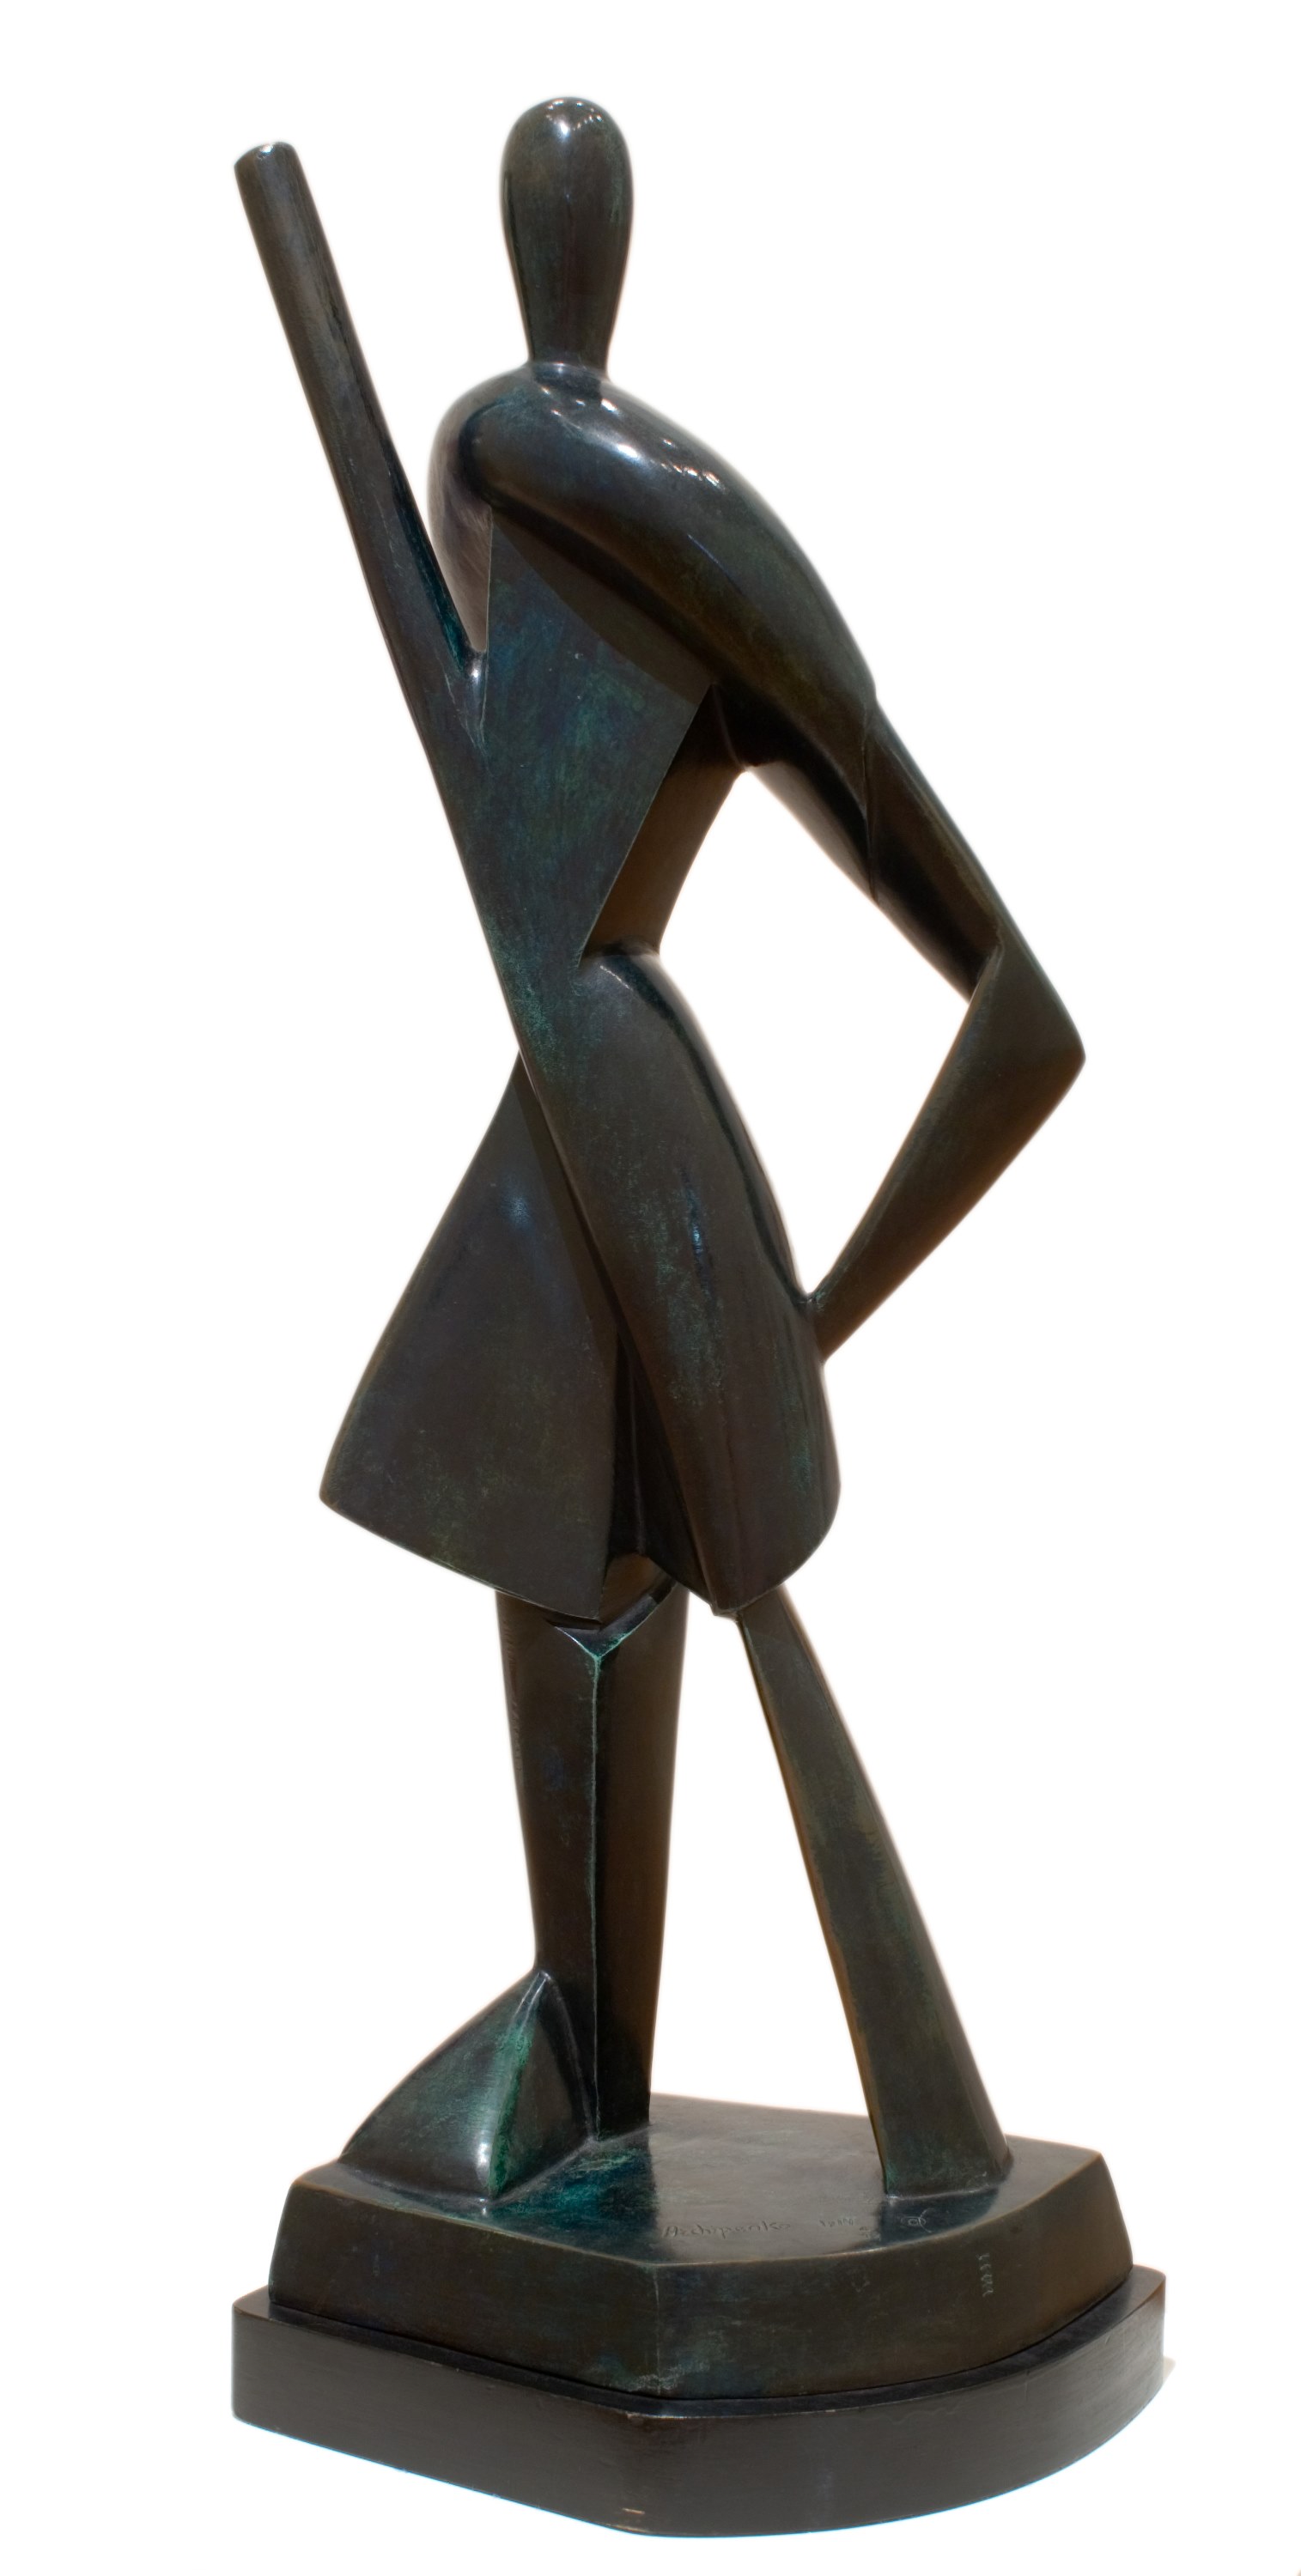 <p><strong>Alexander Archipenko</strong><br />
<em>Gondolier</em> 1914<br />
Mackelvie Trust Collection, Auckland Art Gallery Toi o Tāmaki, purchased 1964</p>